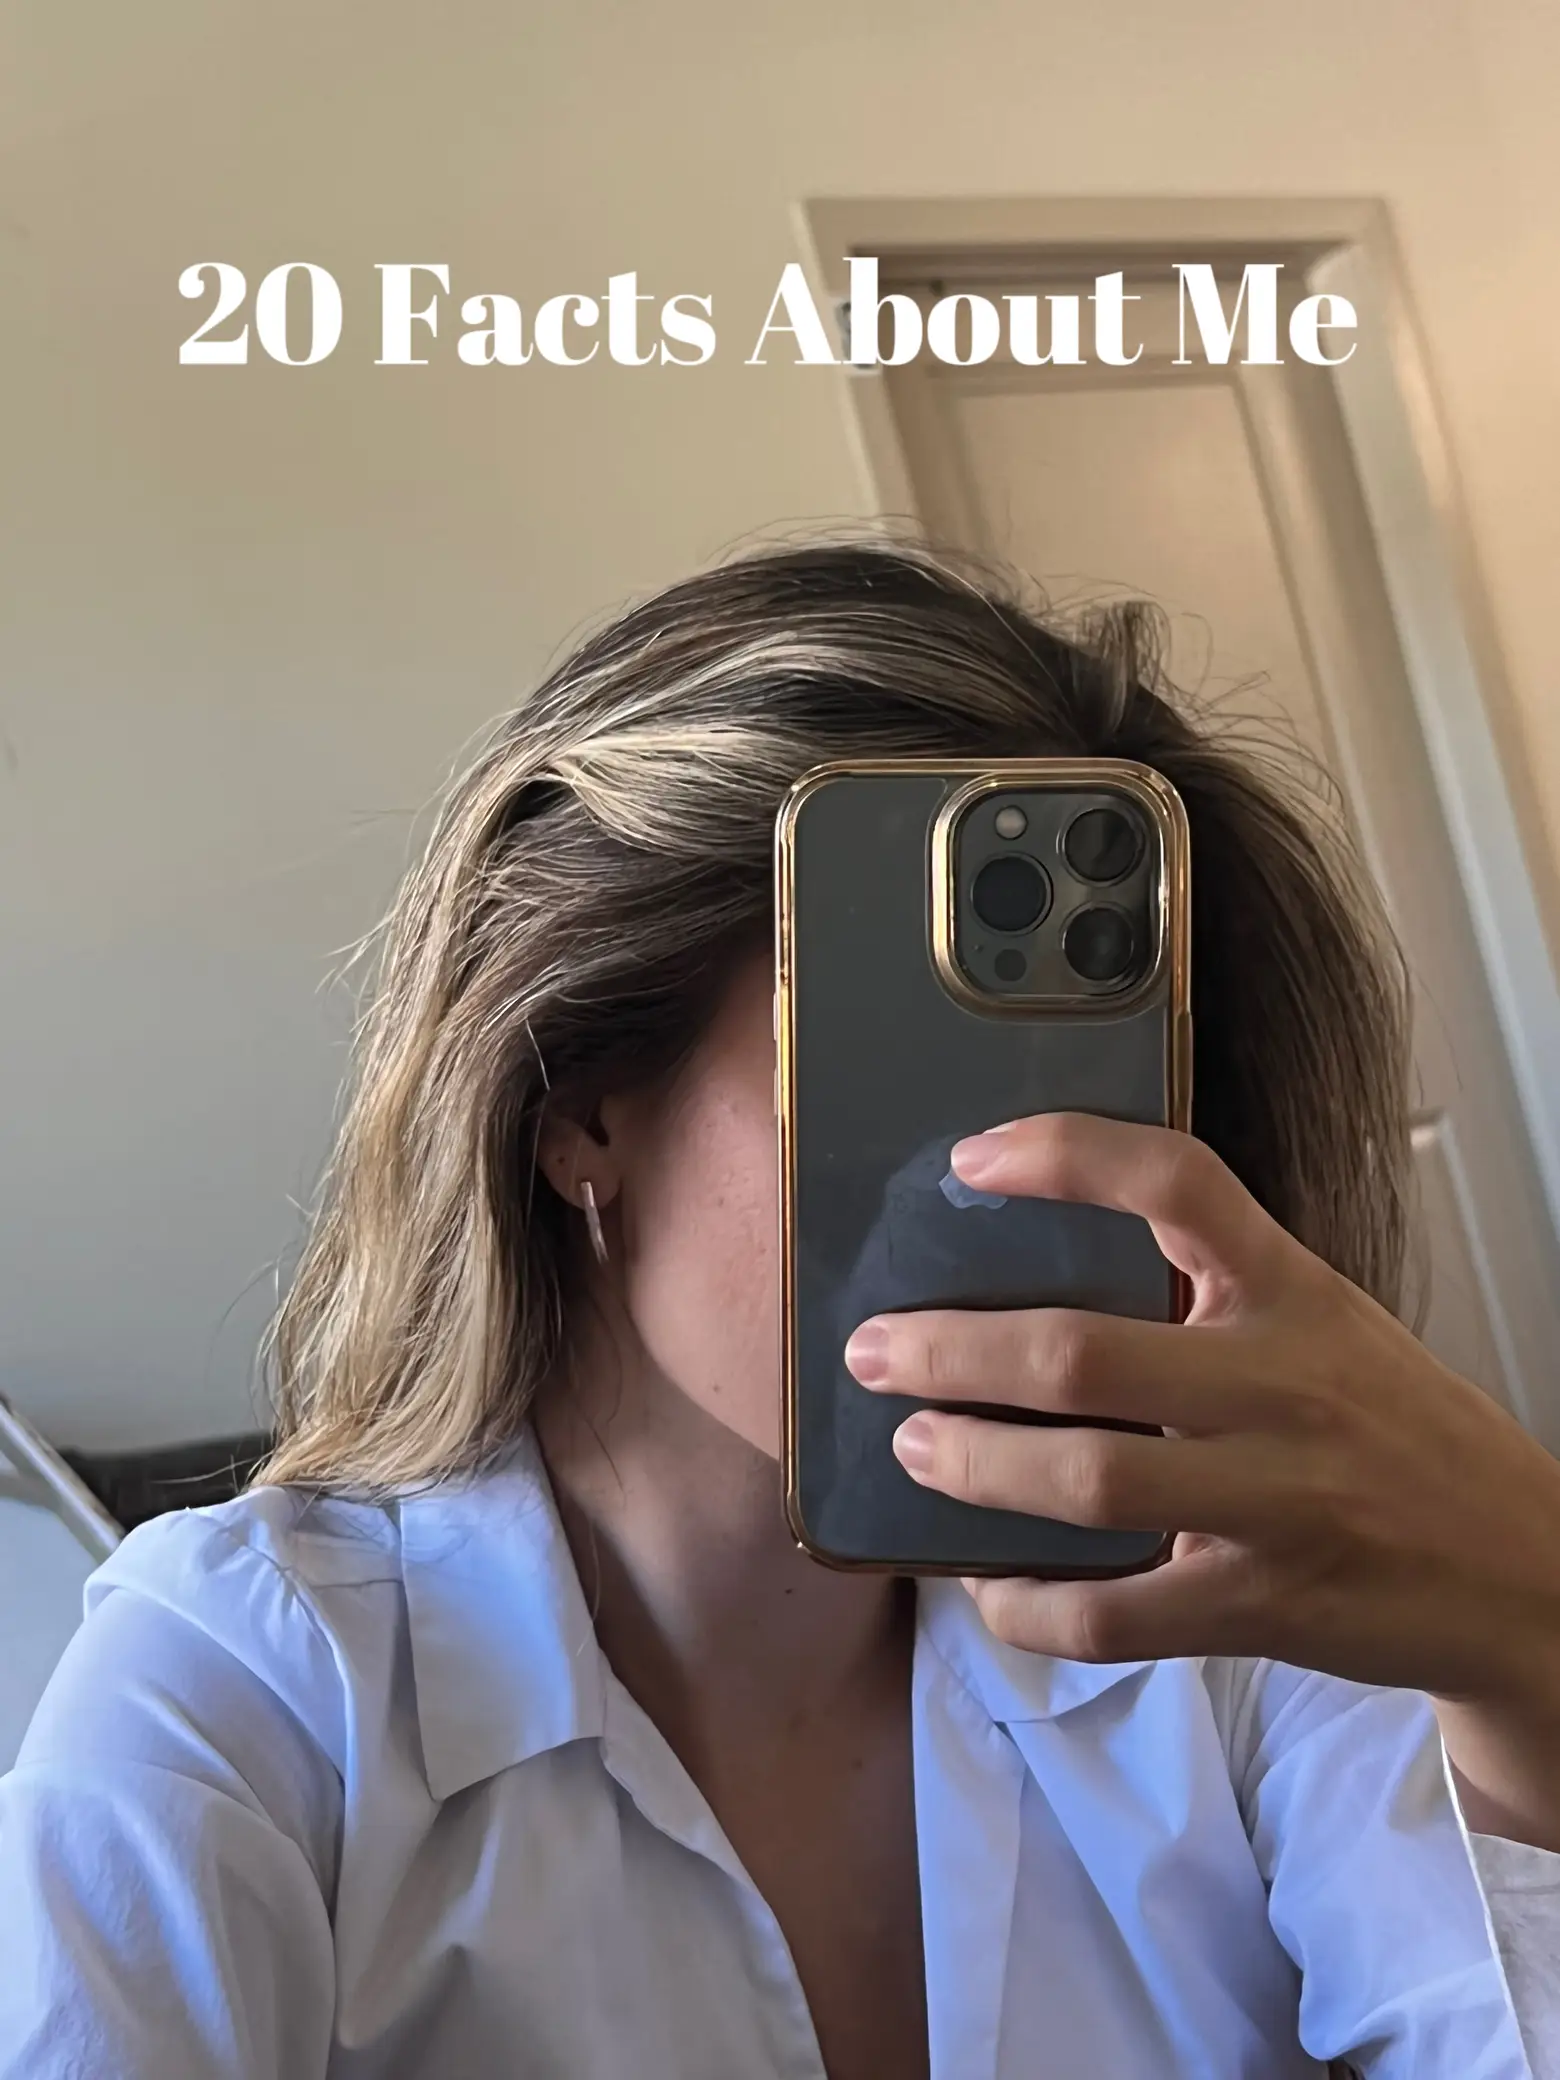 20 facts about me